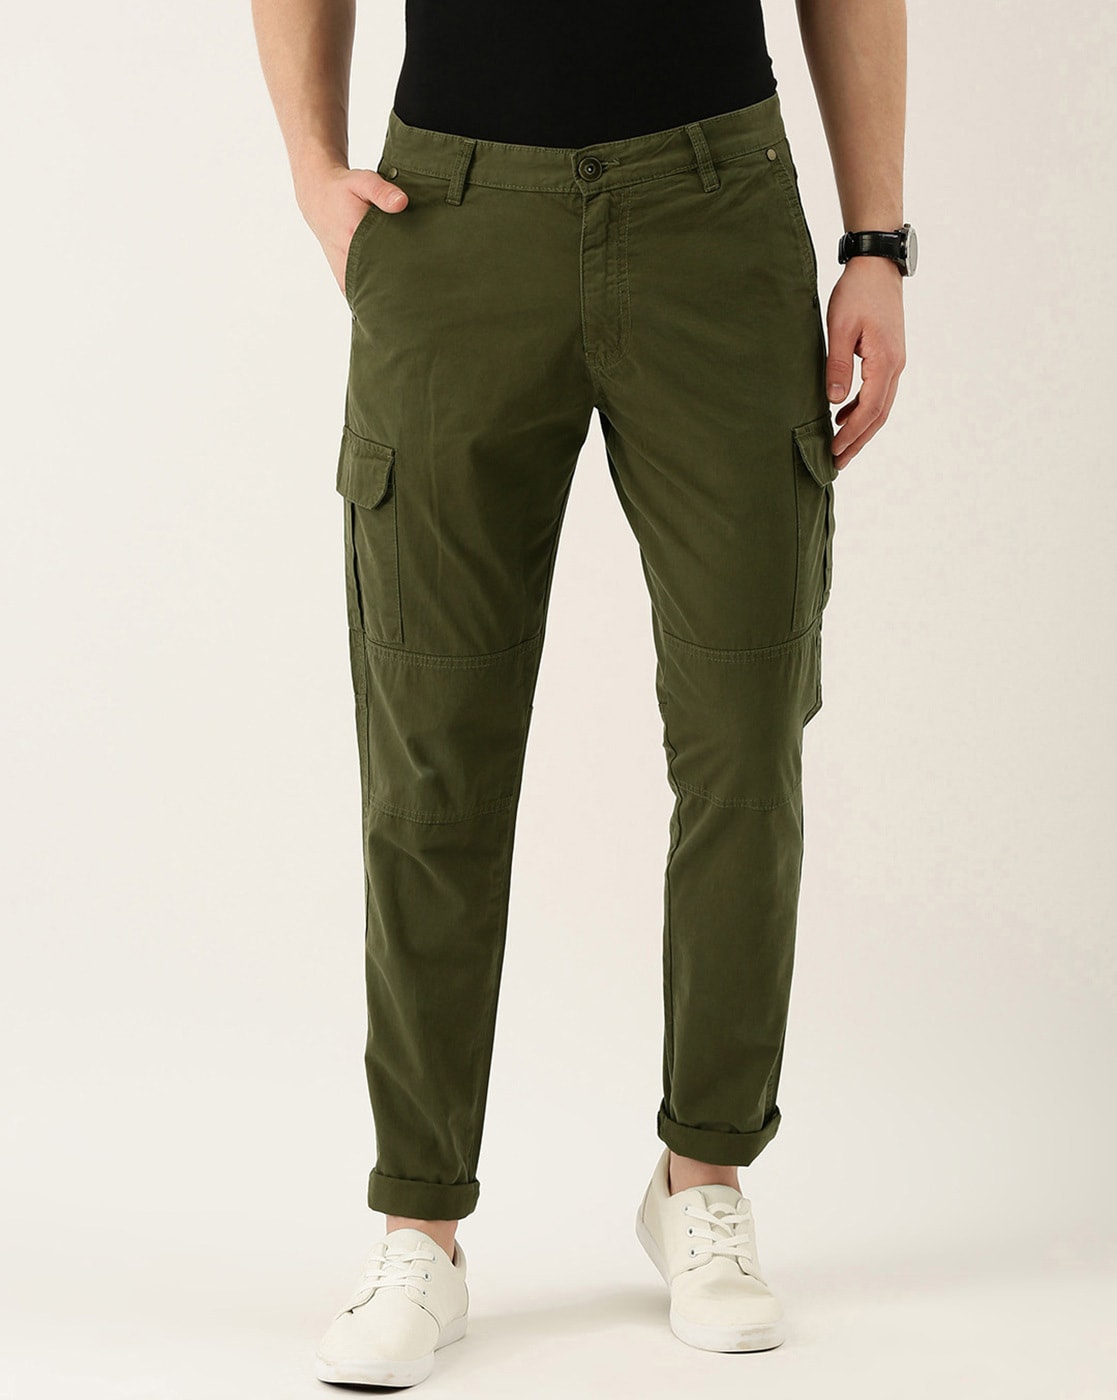 What To Wear With Green Cargo Pants | ubicaciondepersonas.cdmx.gob.mx